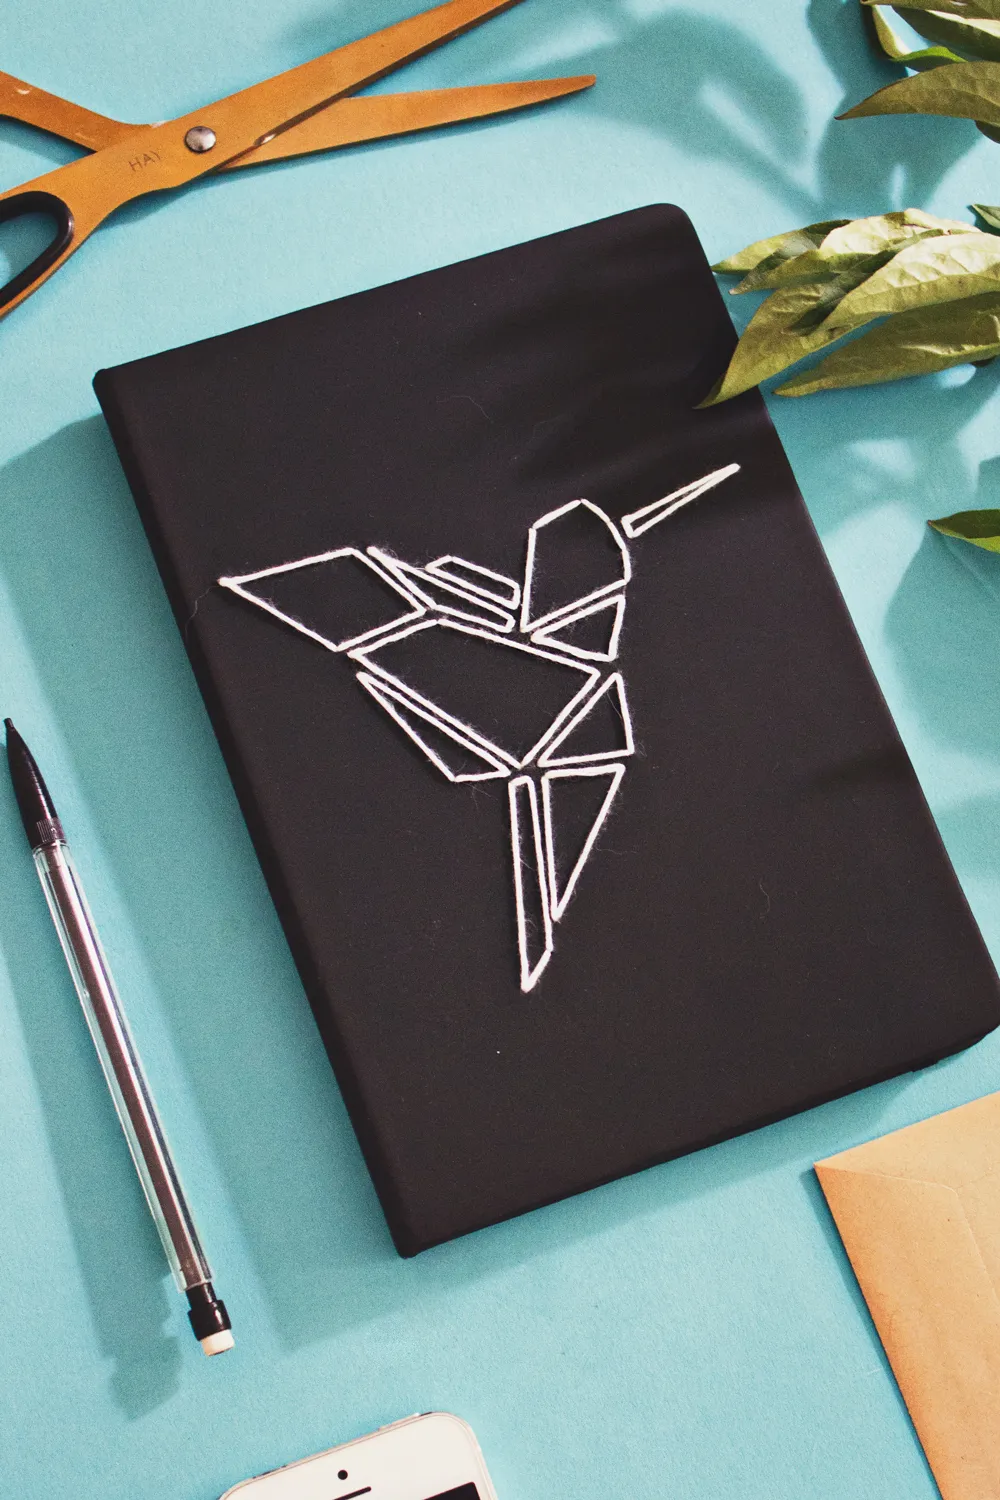 DIY-_-Origami-Embroidered-Book-Cover fathers day crafts